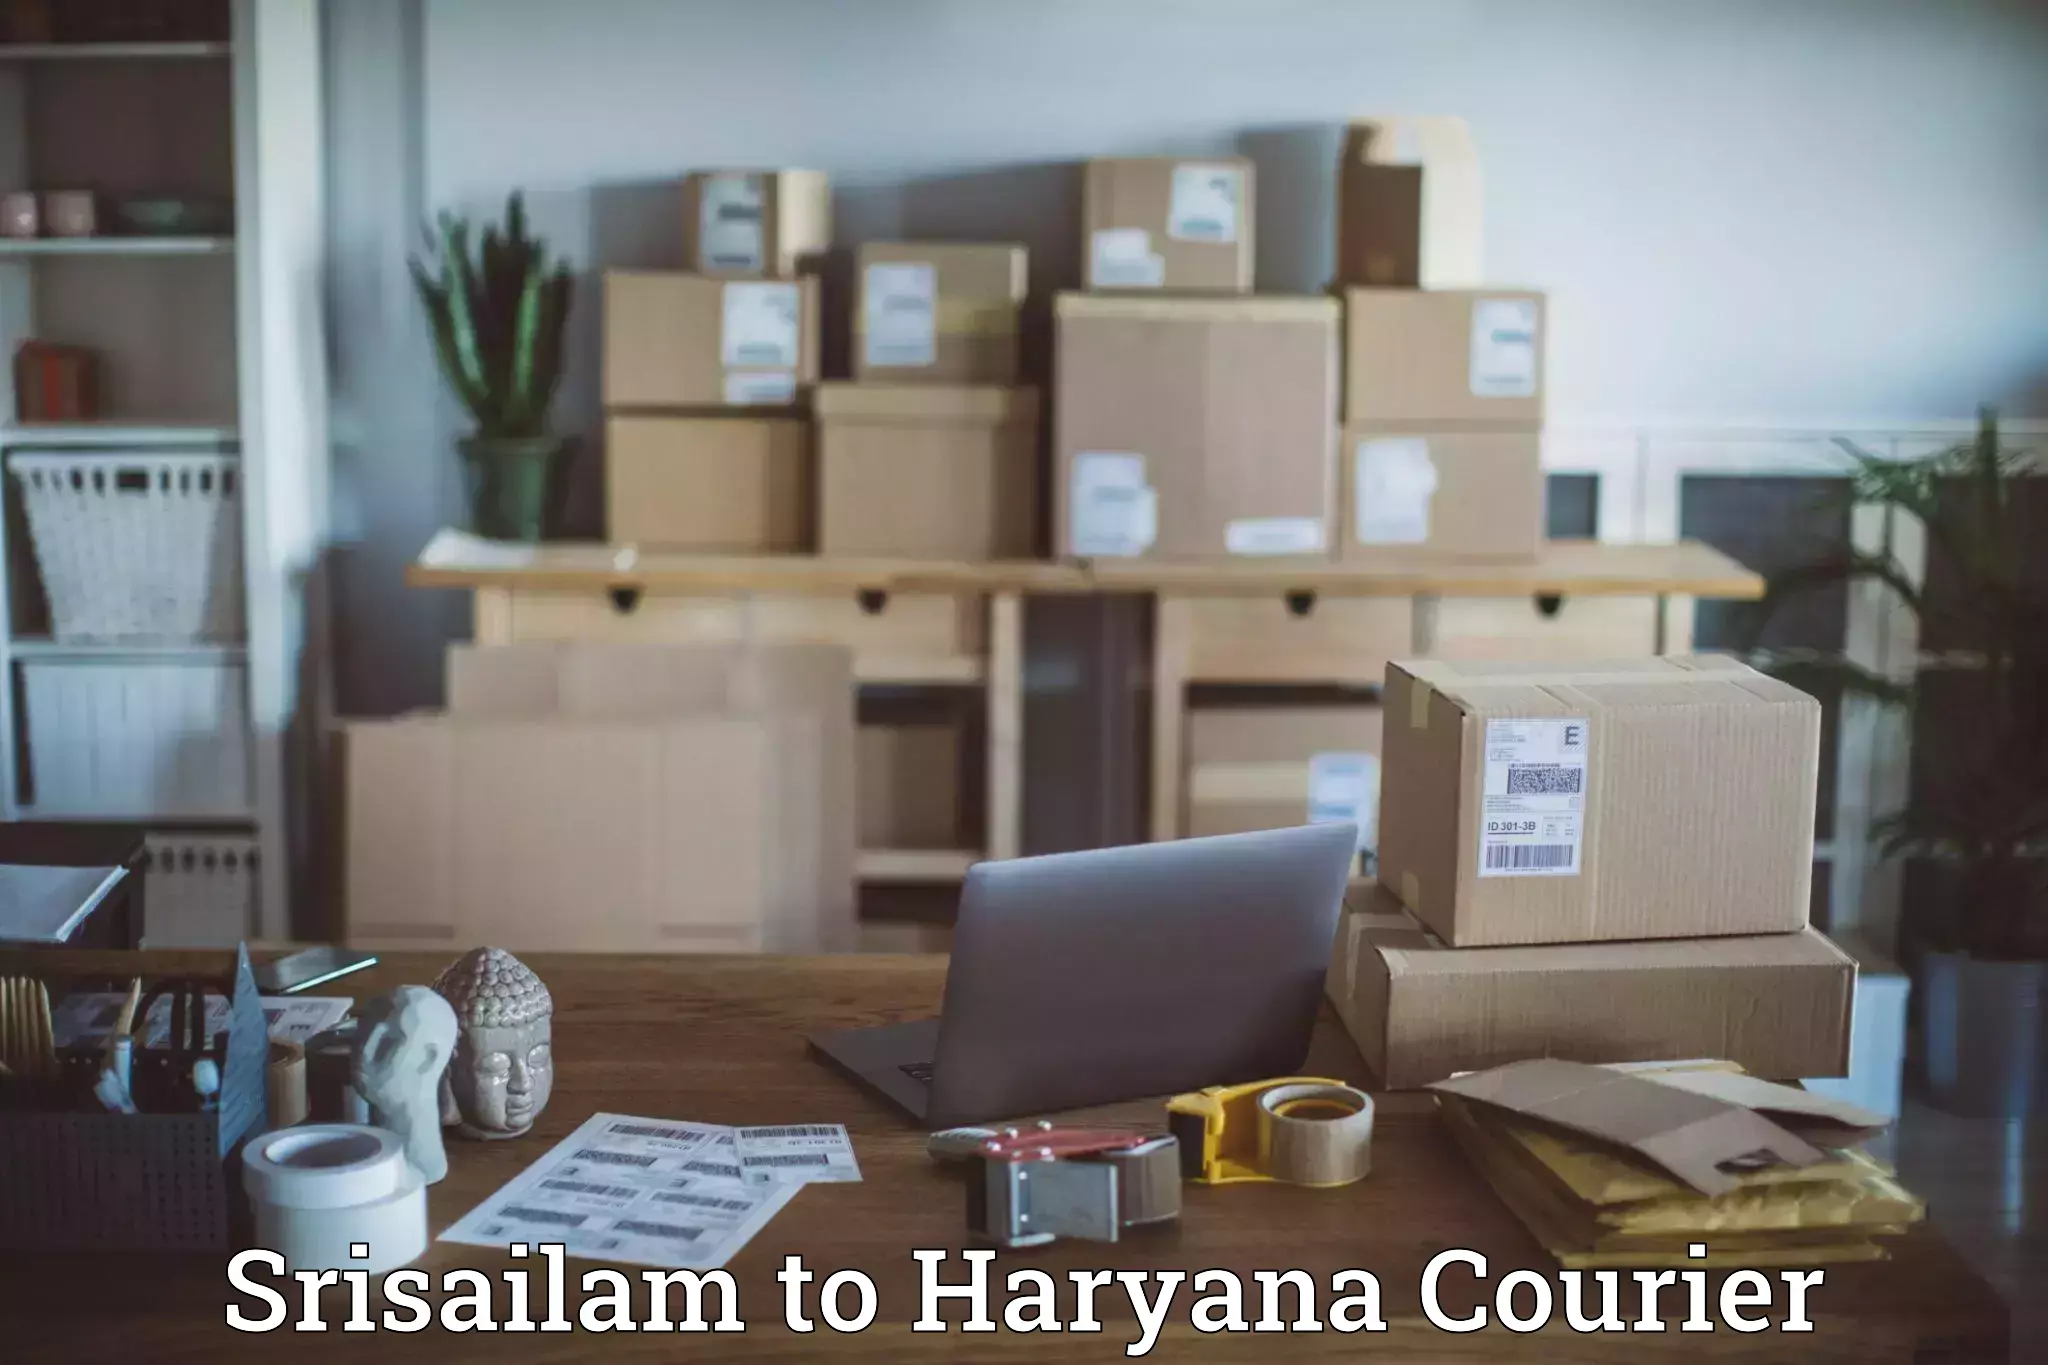 State-of-the-art courier technology Srisailam to Kurukshetra